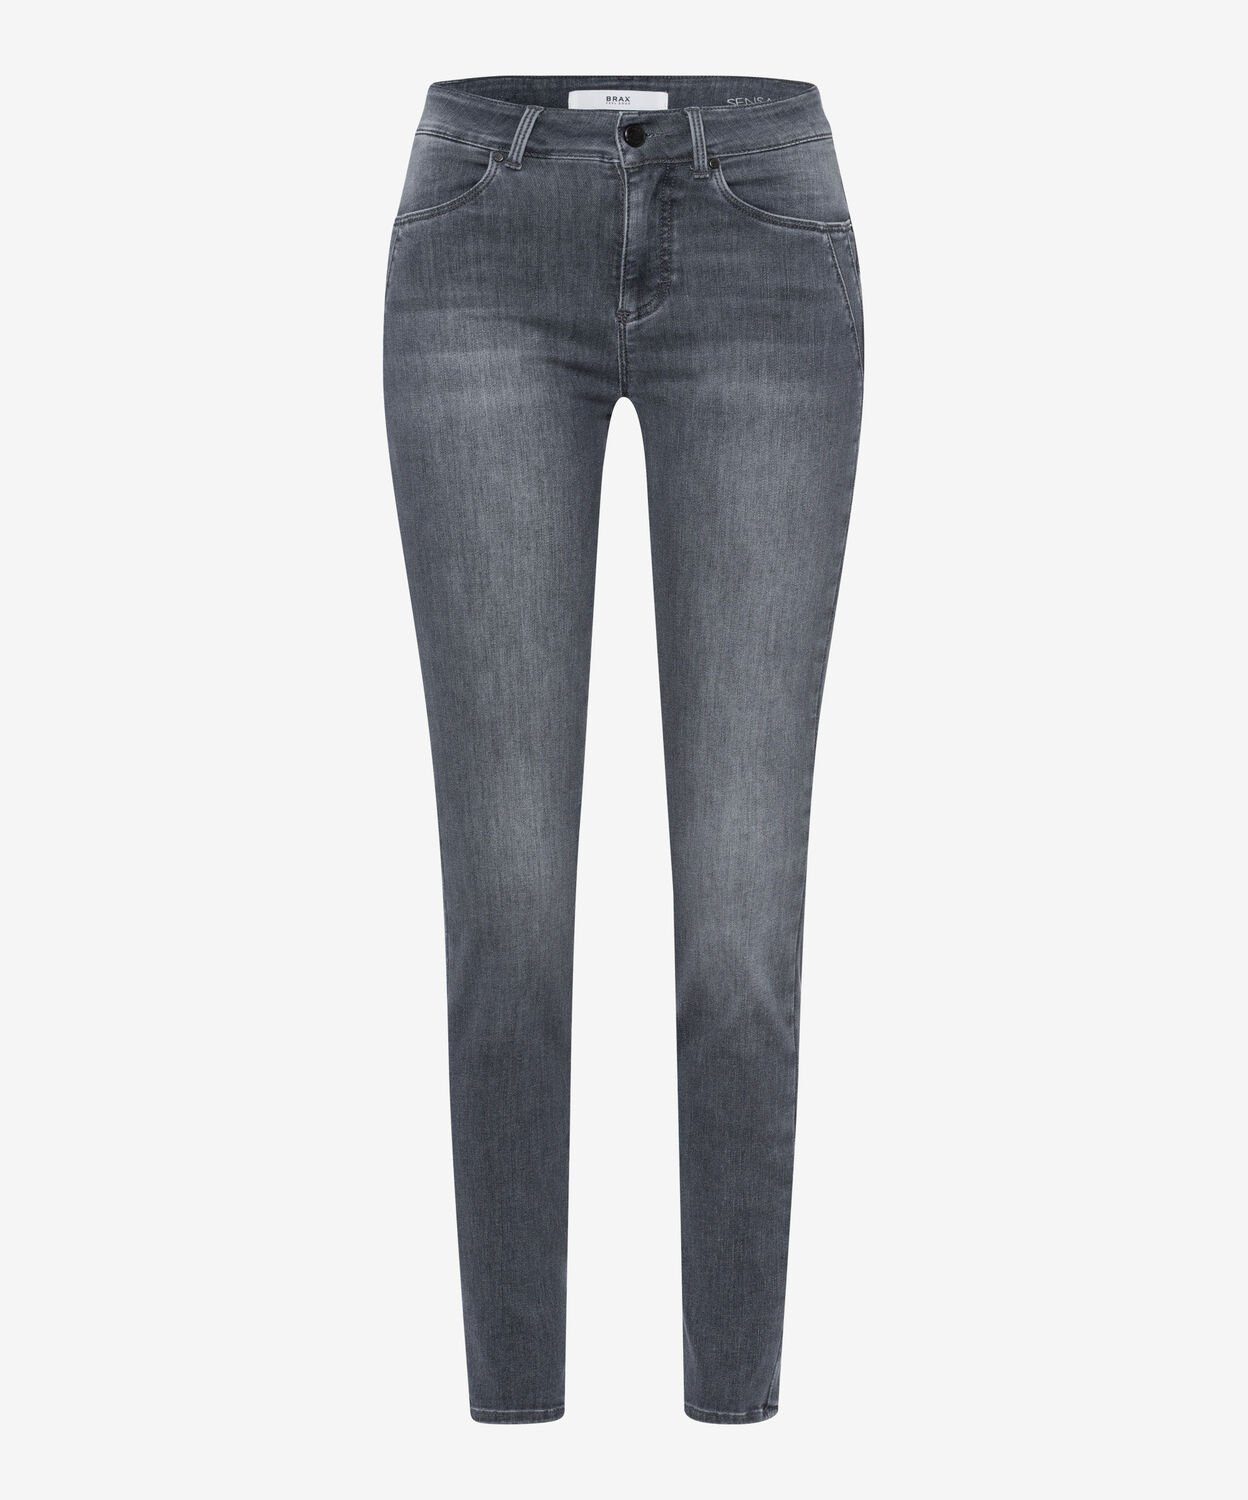 Regular-fit-Jeans GREY Brax STYLE.ANANOS, USED